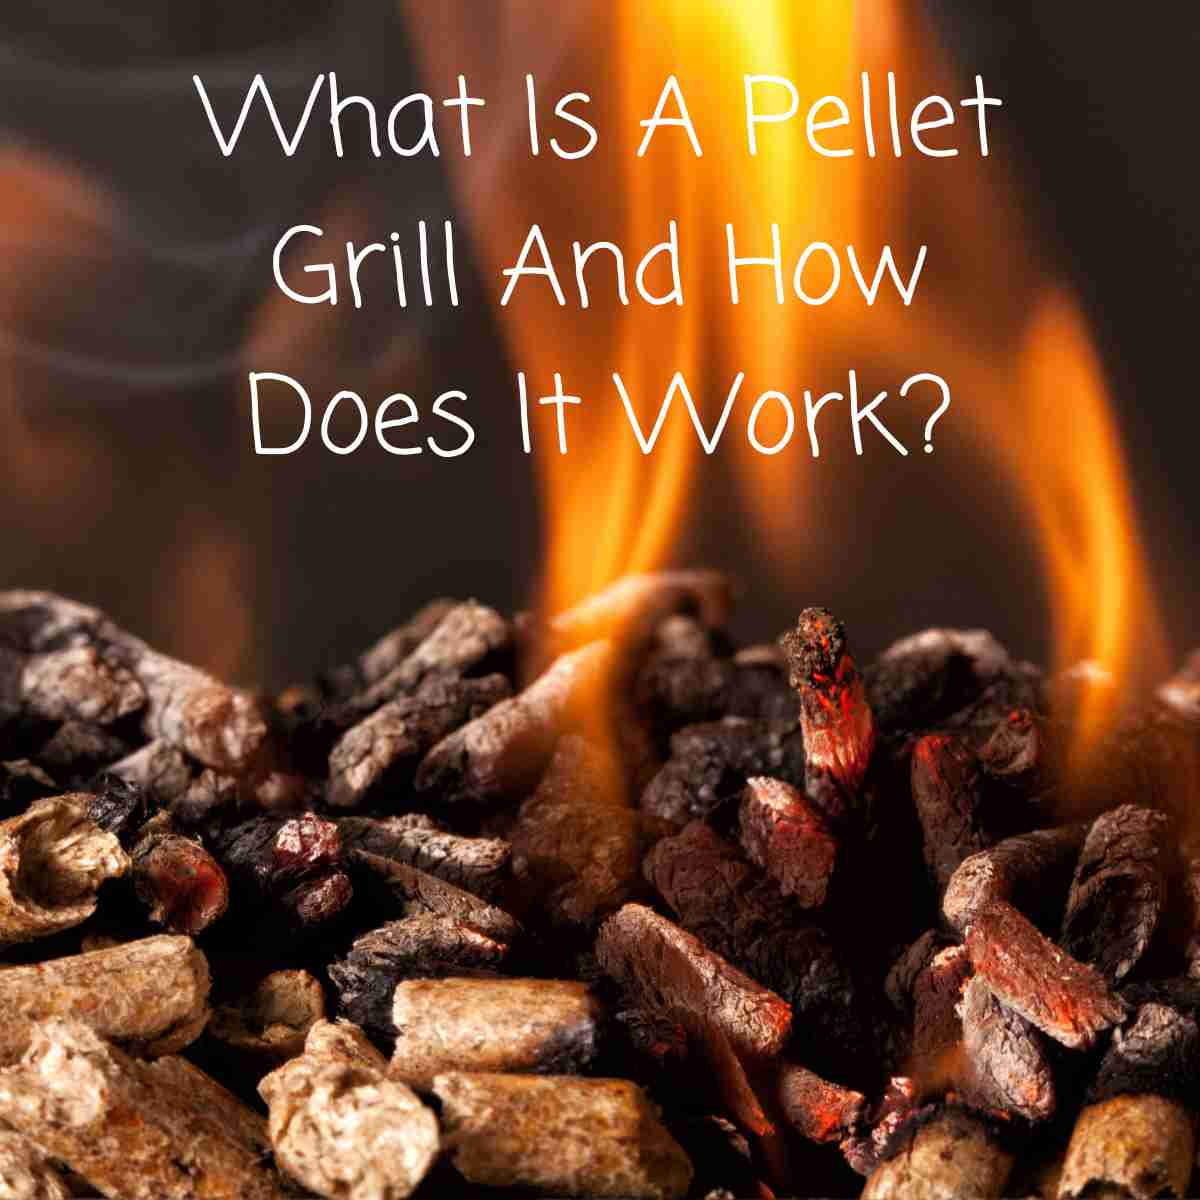 What Is A Pellet Grill And How Does It Work?